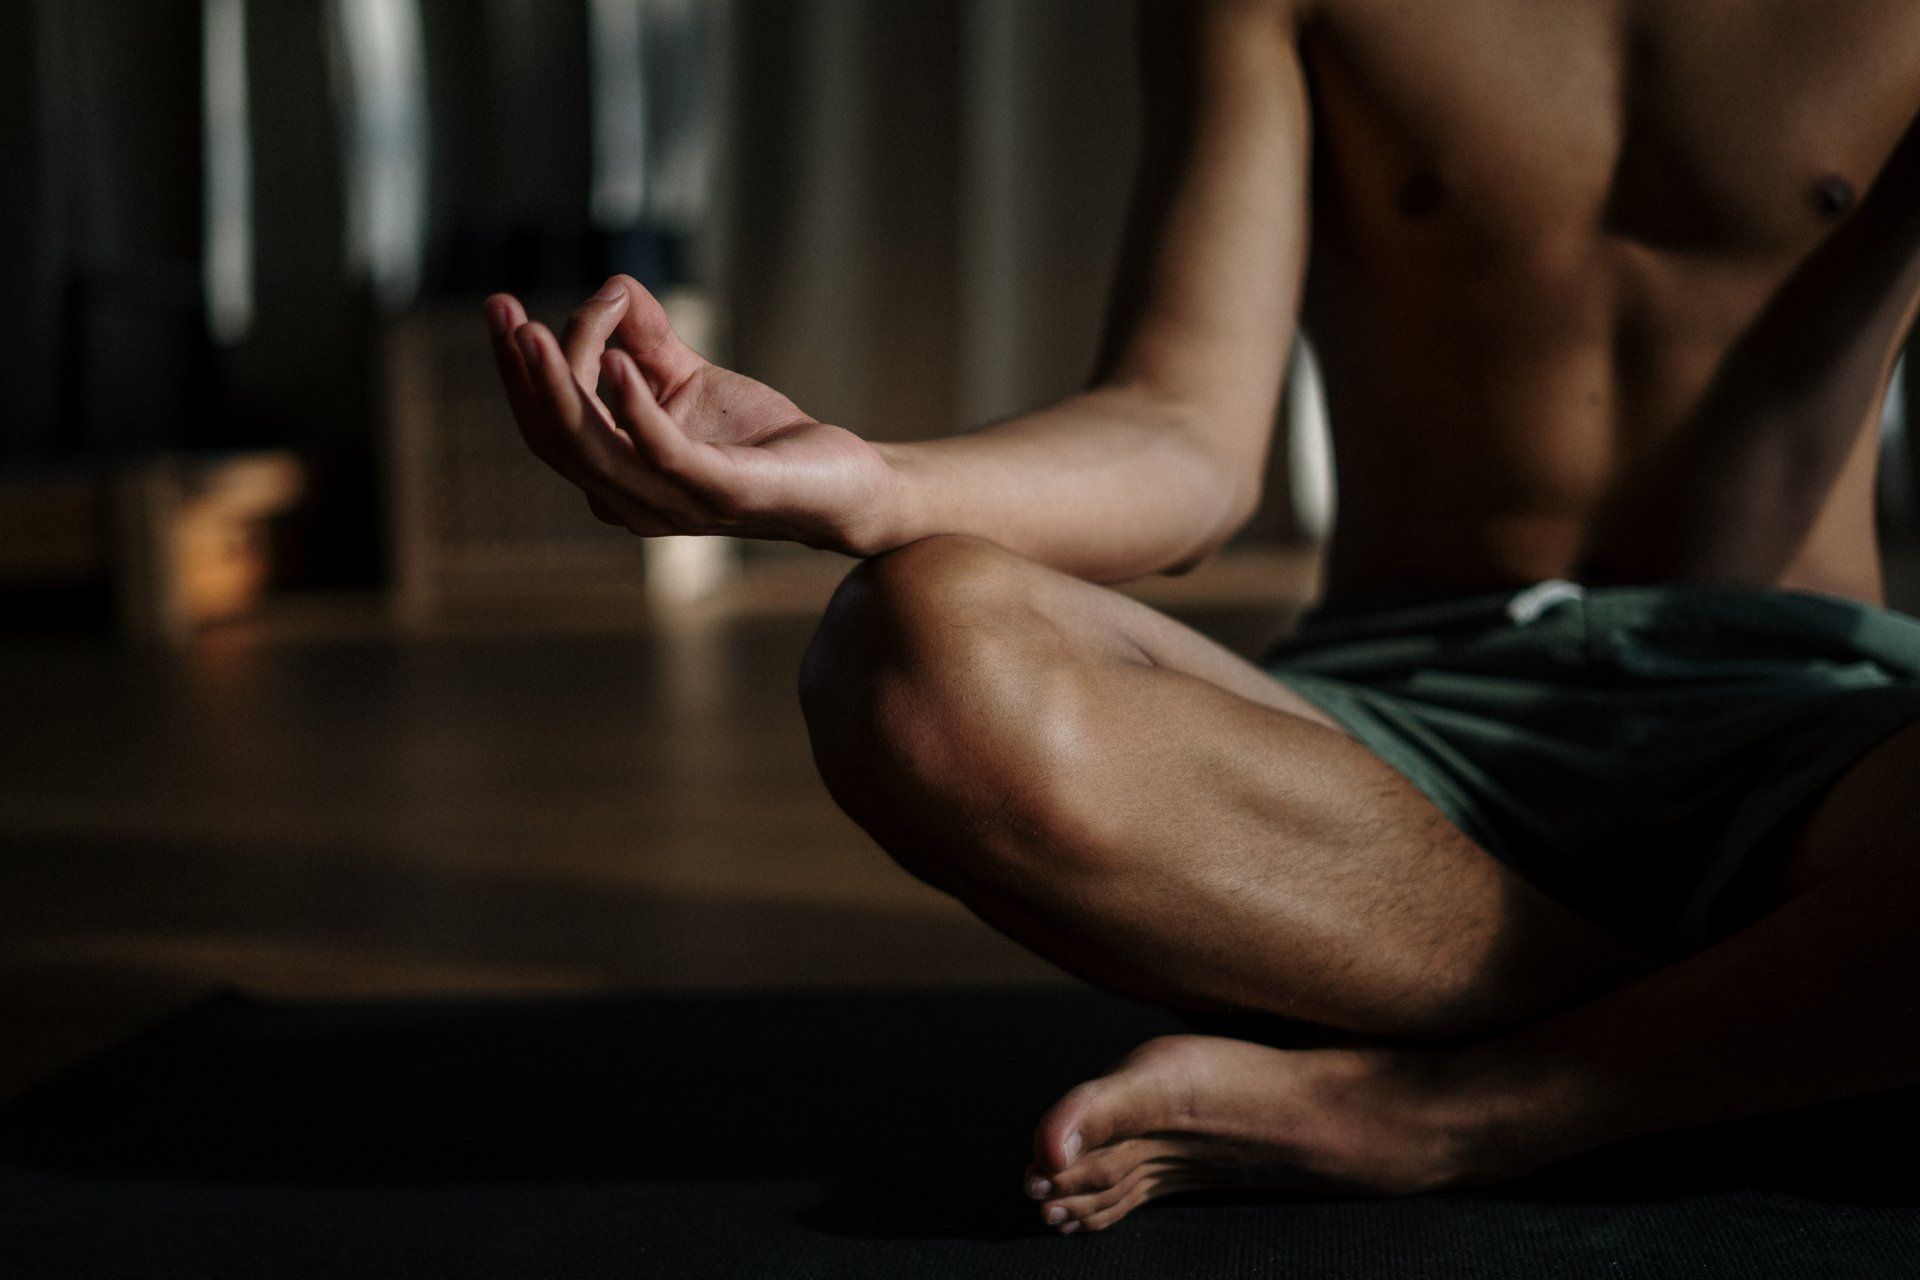 A shirtless man is sitting in a lotus position on a yoga mat.